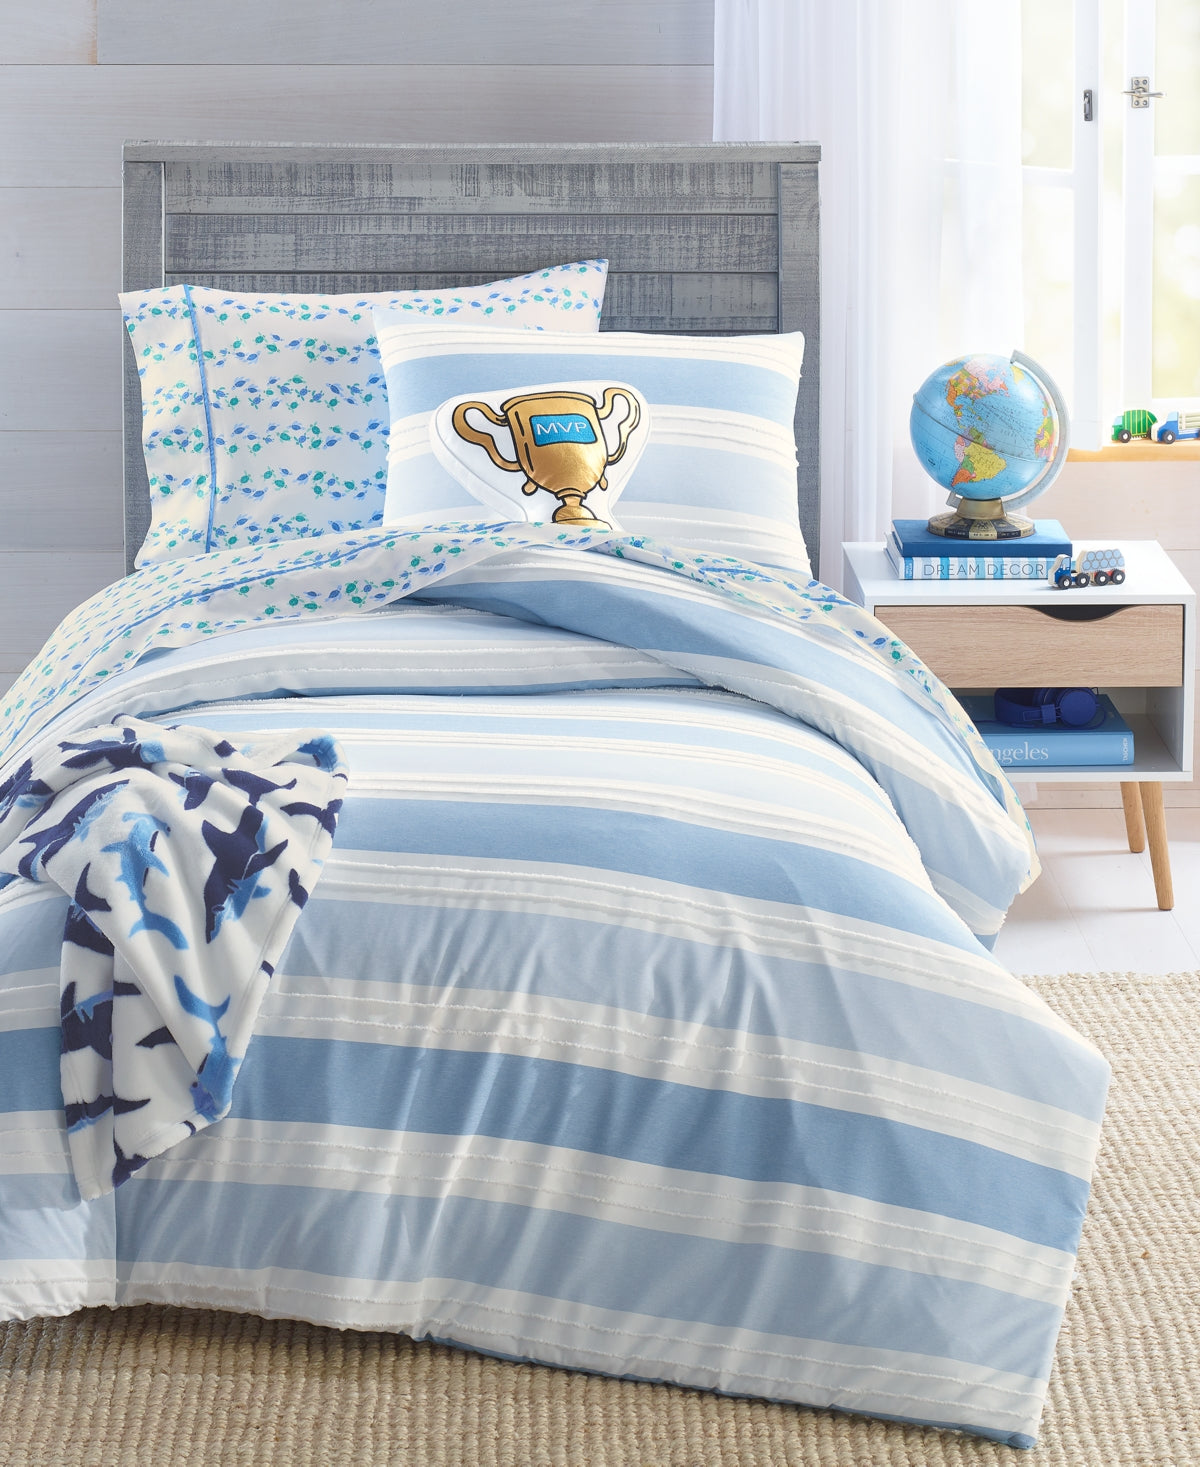 Charter Club Kids Clip Jacquard 3-Pc. Comforter Set, Full/Queen, Created for Macy's Bedding